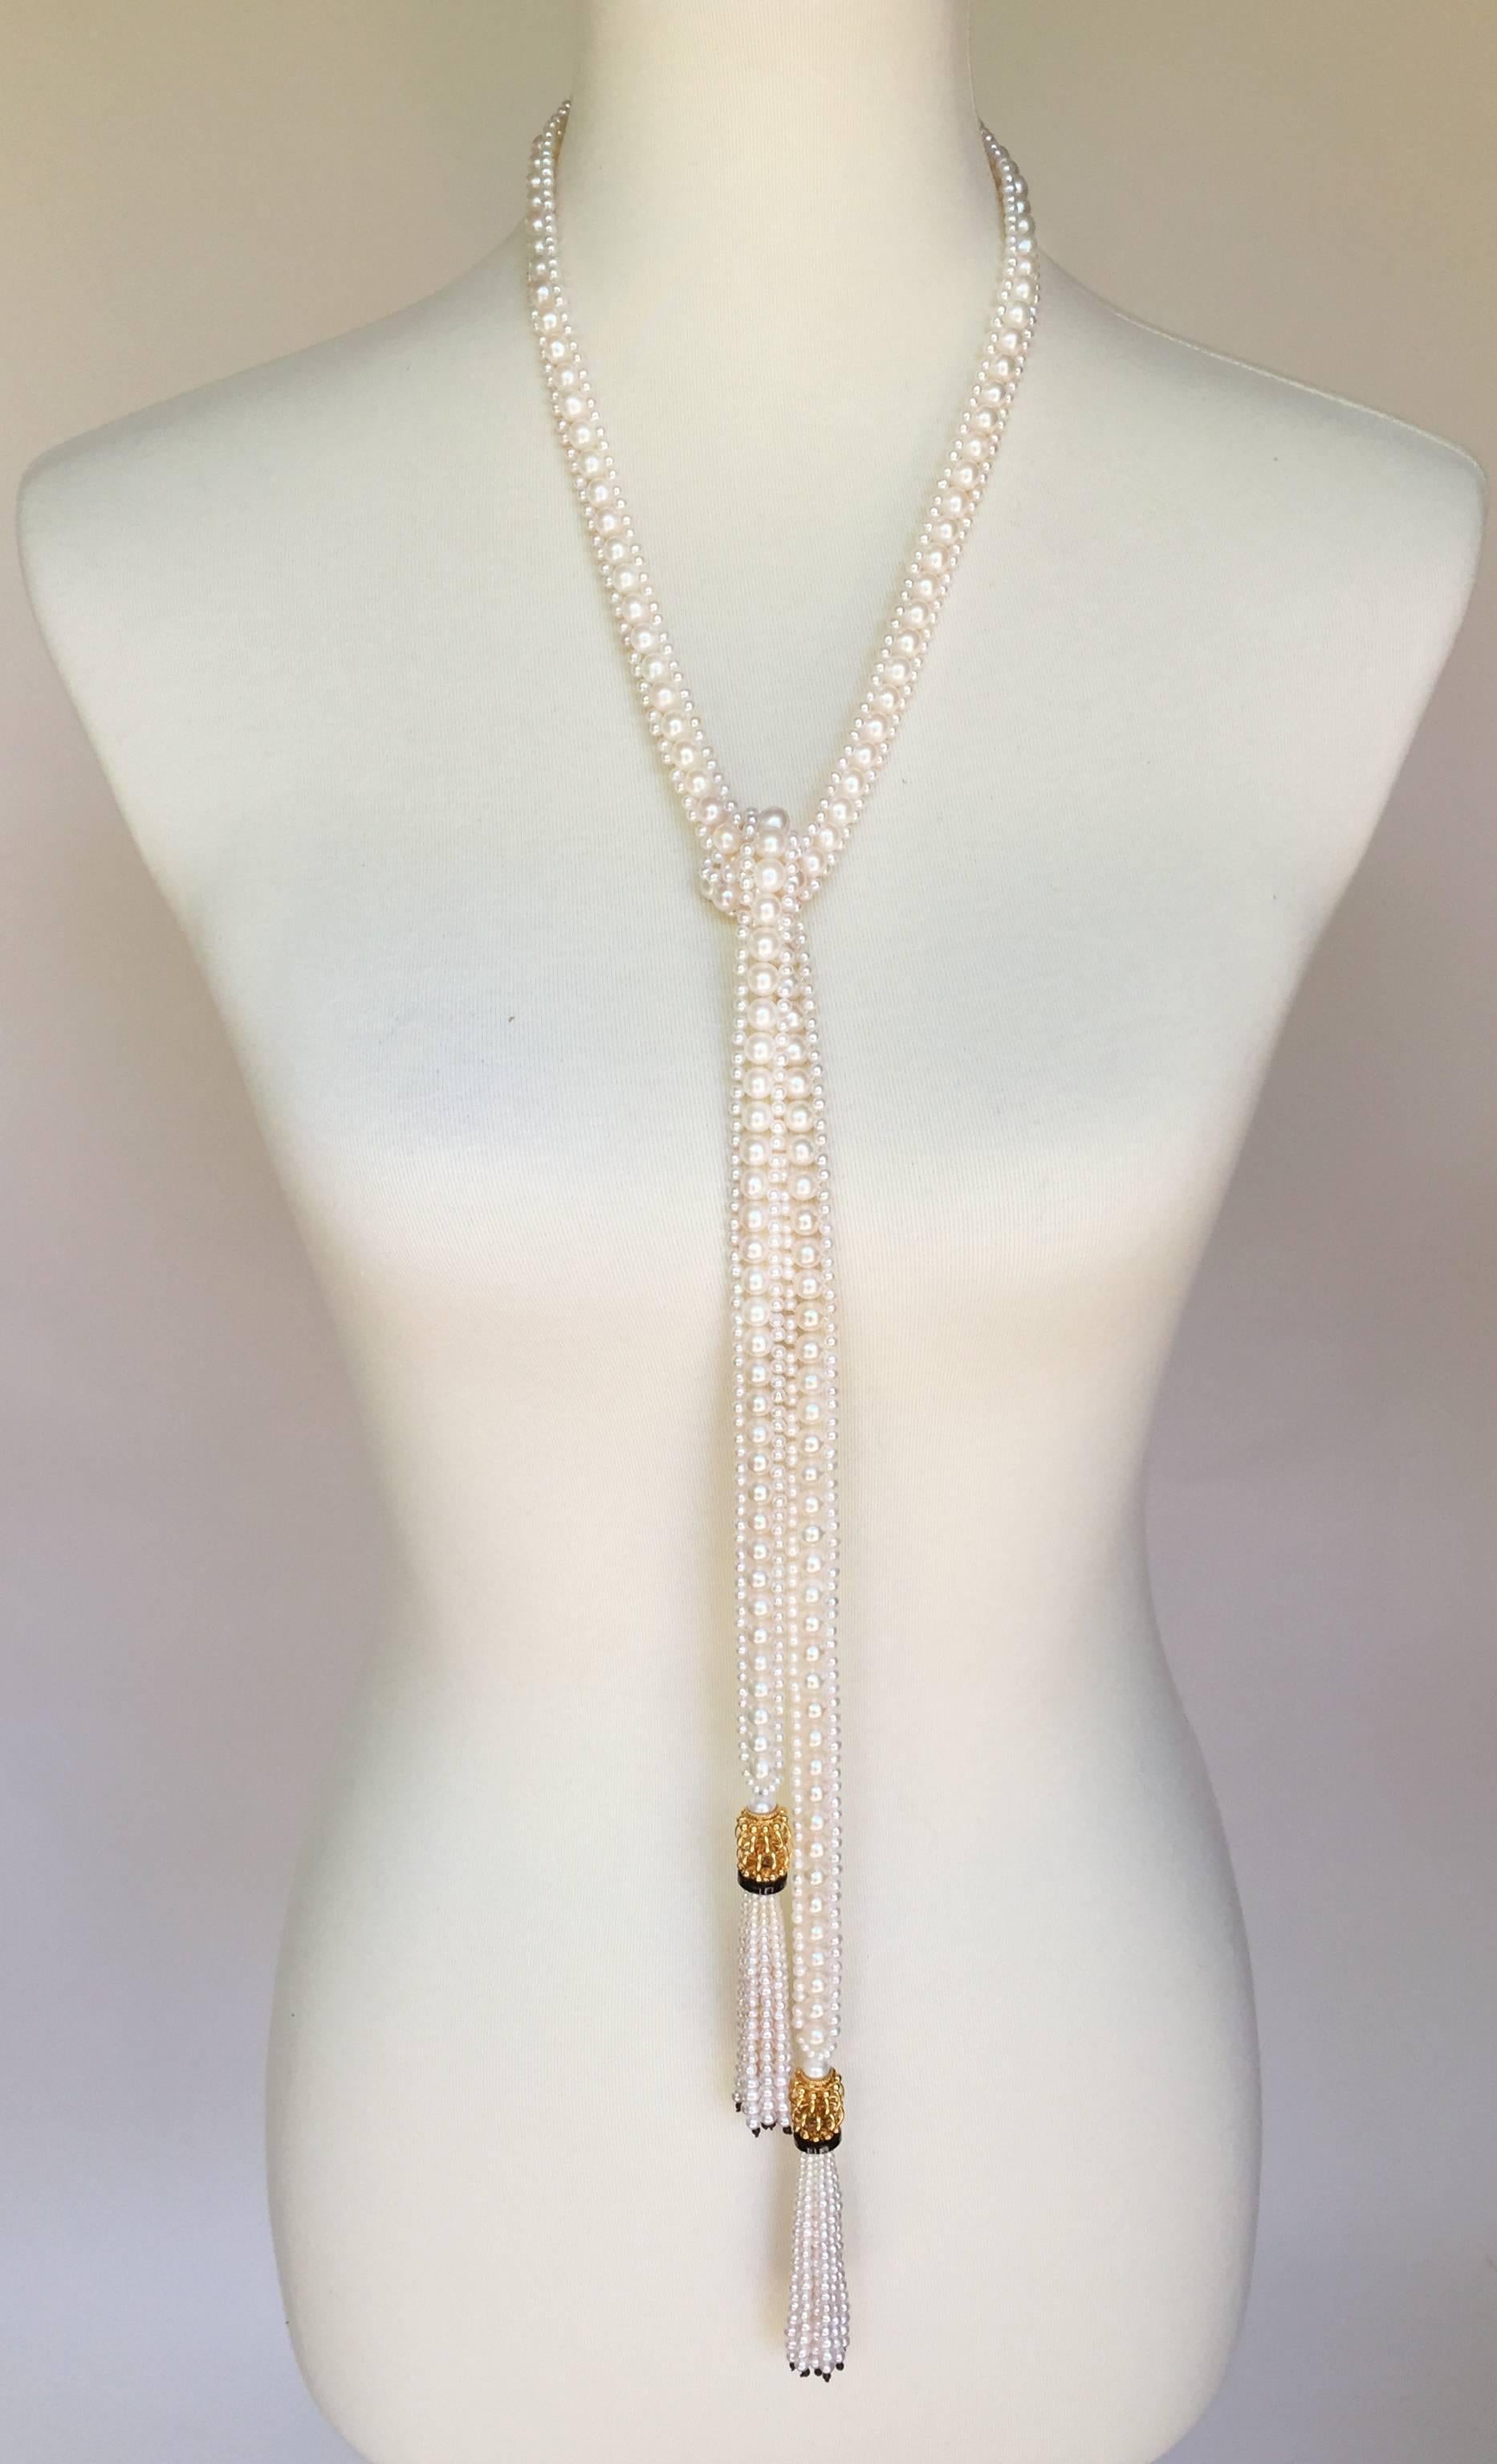 Artist White Woven Pearl Sautoir with Pearl Tassels and Onyx Detailing by Marina J